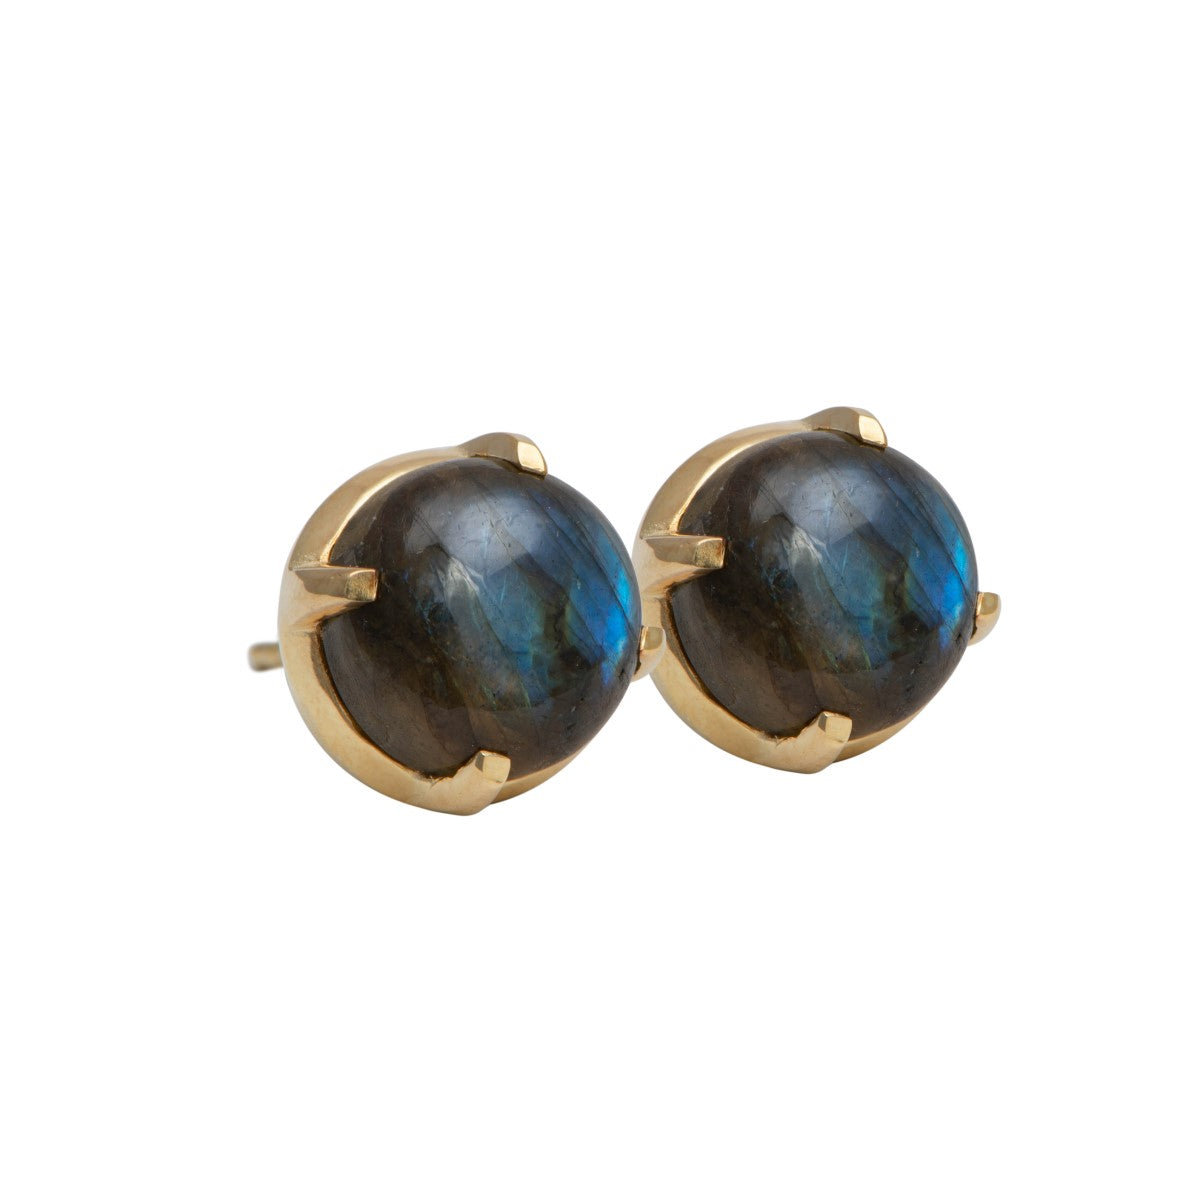 Round Cabochon Labradorite Stud Earrings in Gold Plated Sterling Silver